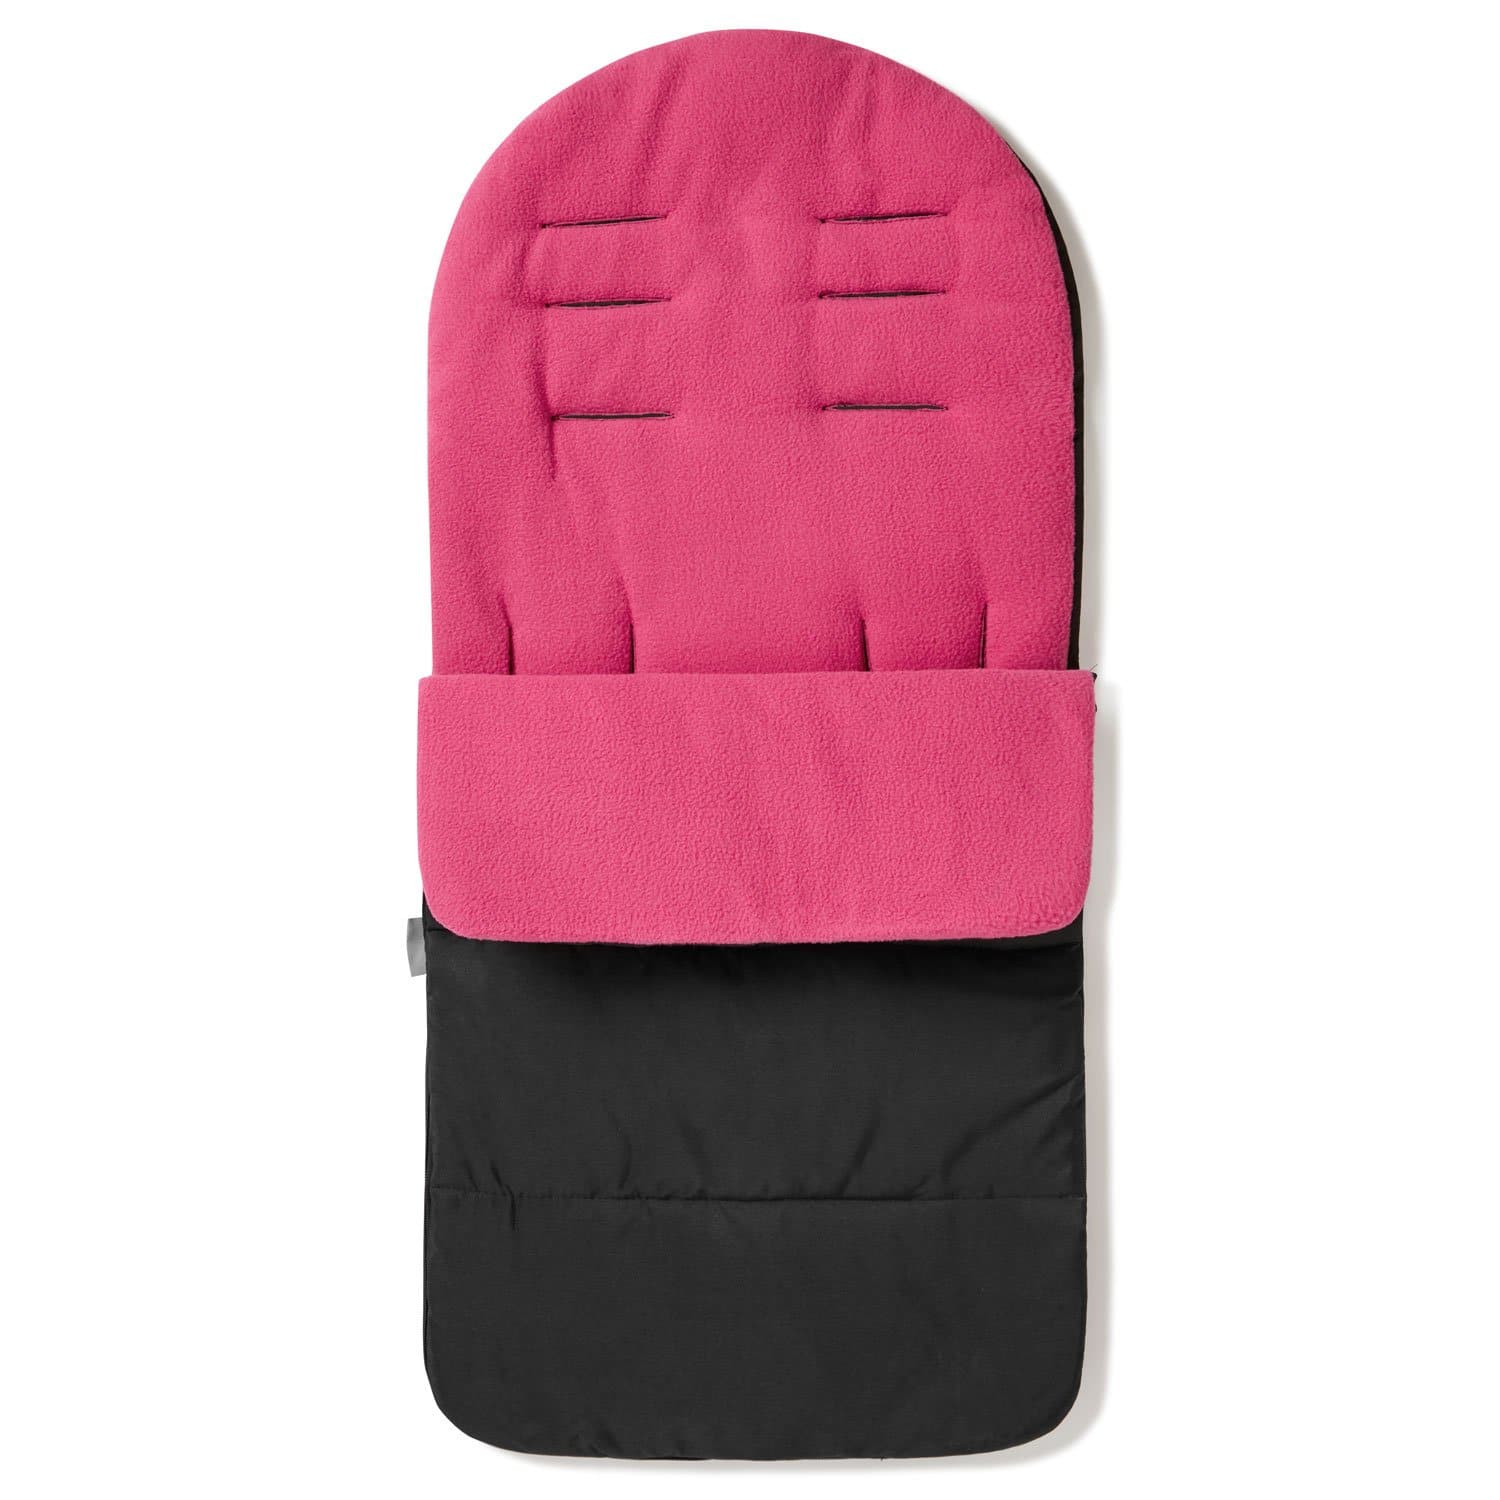 Premium Footmuff / Cosy Toes Compatible with GB - Pink Rose / Fits All Models | For Your Little One